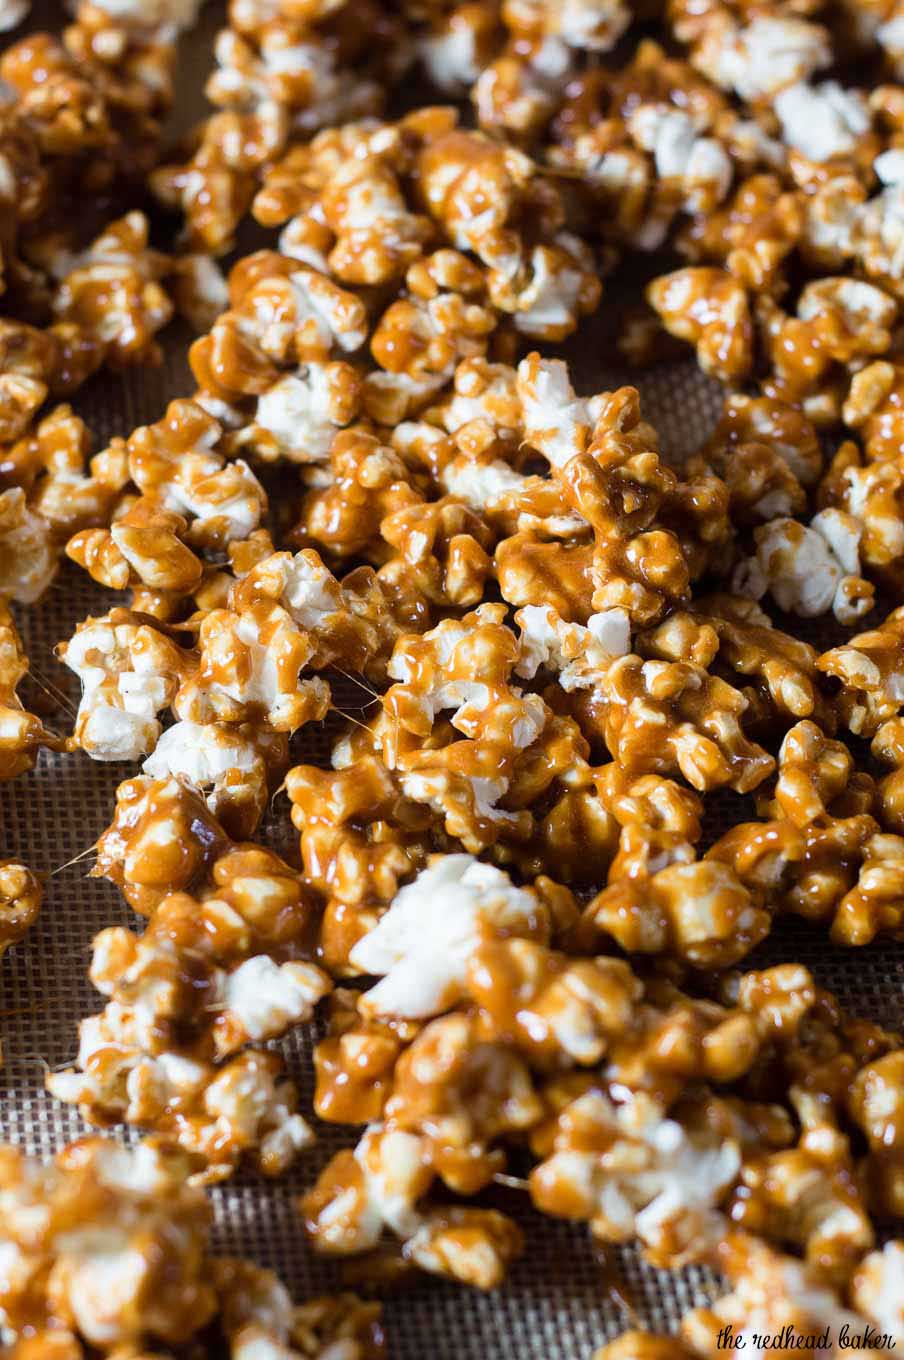 It's so easy to make your own buttery sweet caramel corn at home! This oldie-but-goodie snack will be a hit at any party. 